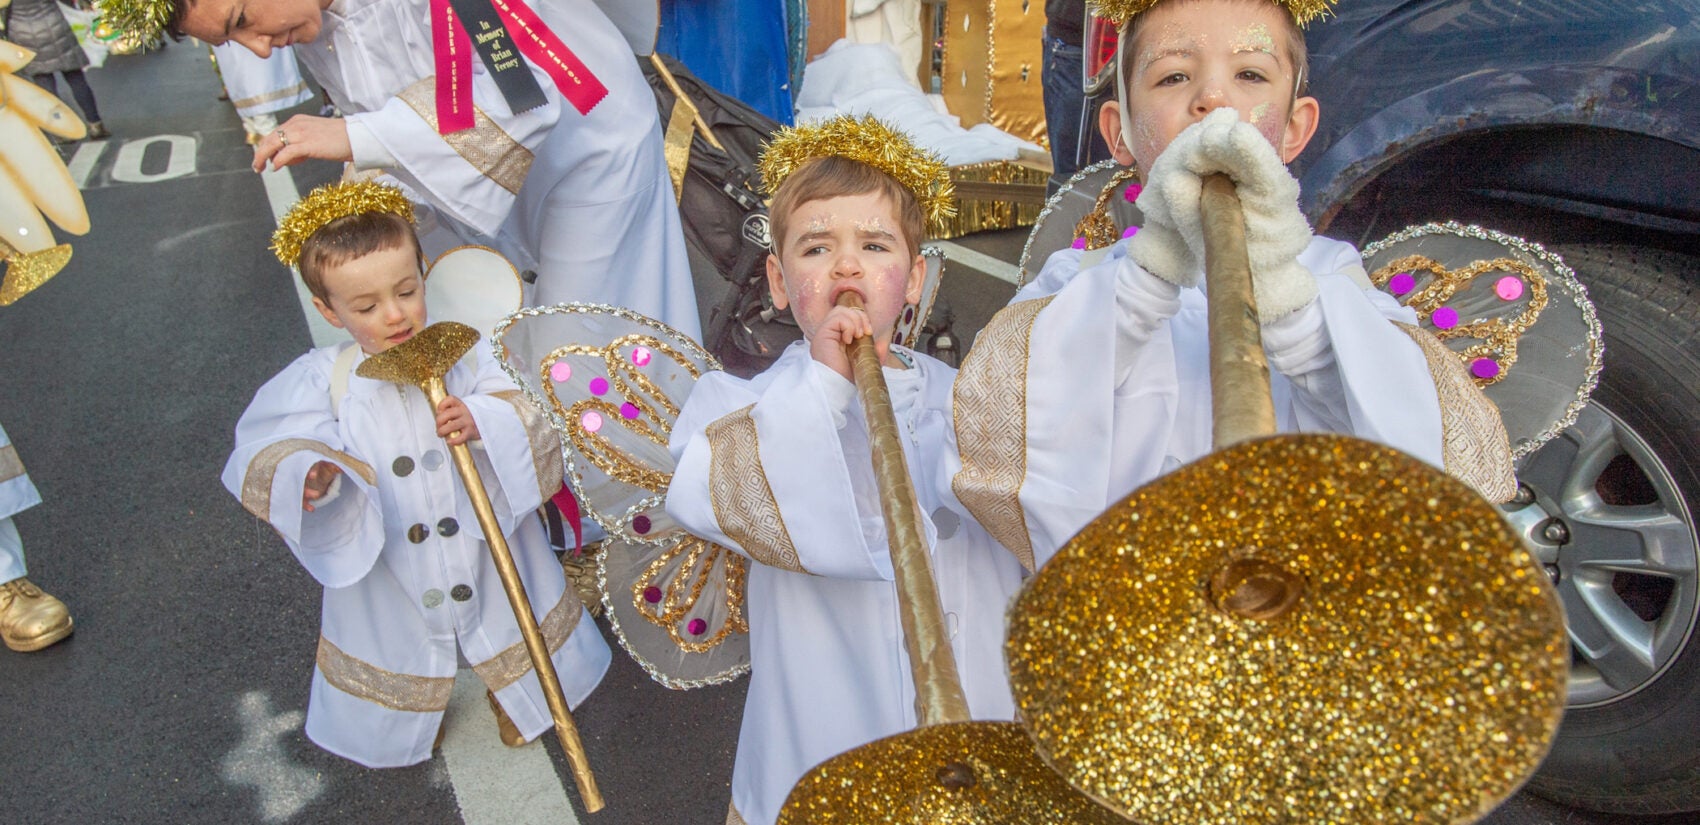 Children dressed up as angels for the Mummers Parade